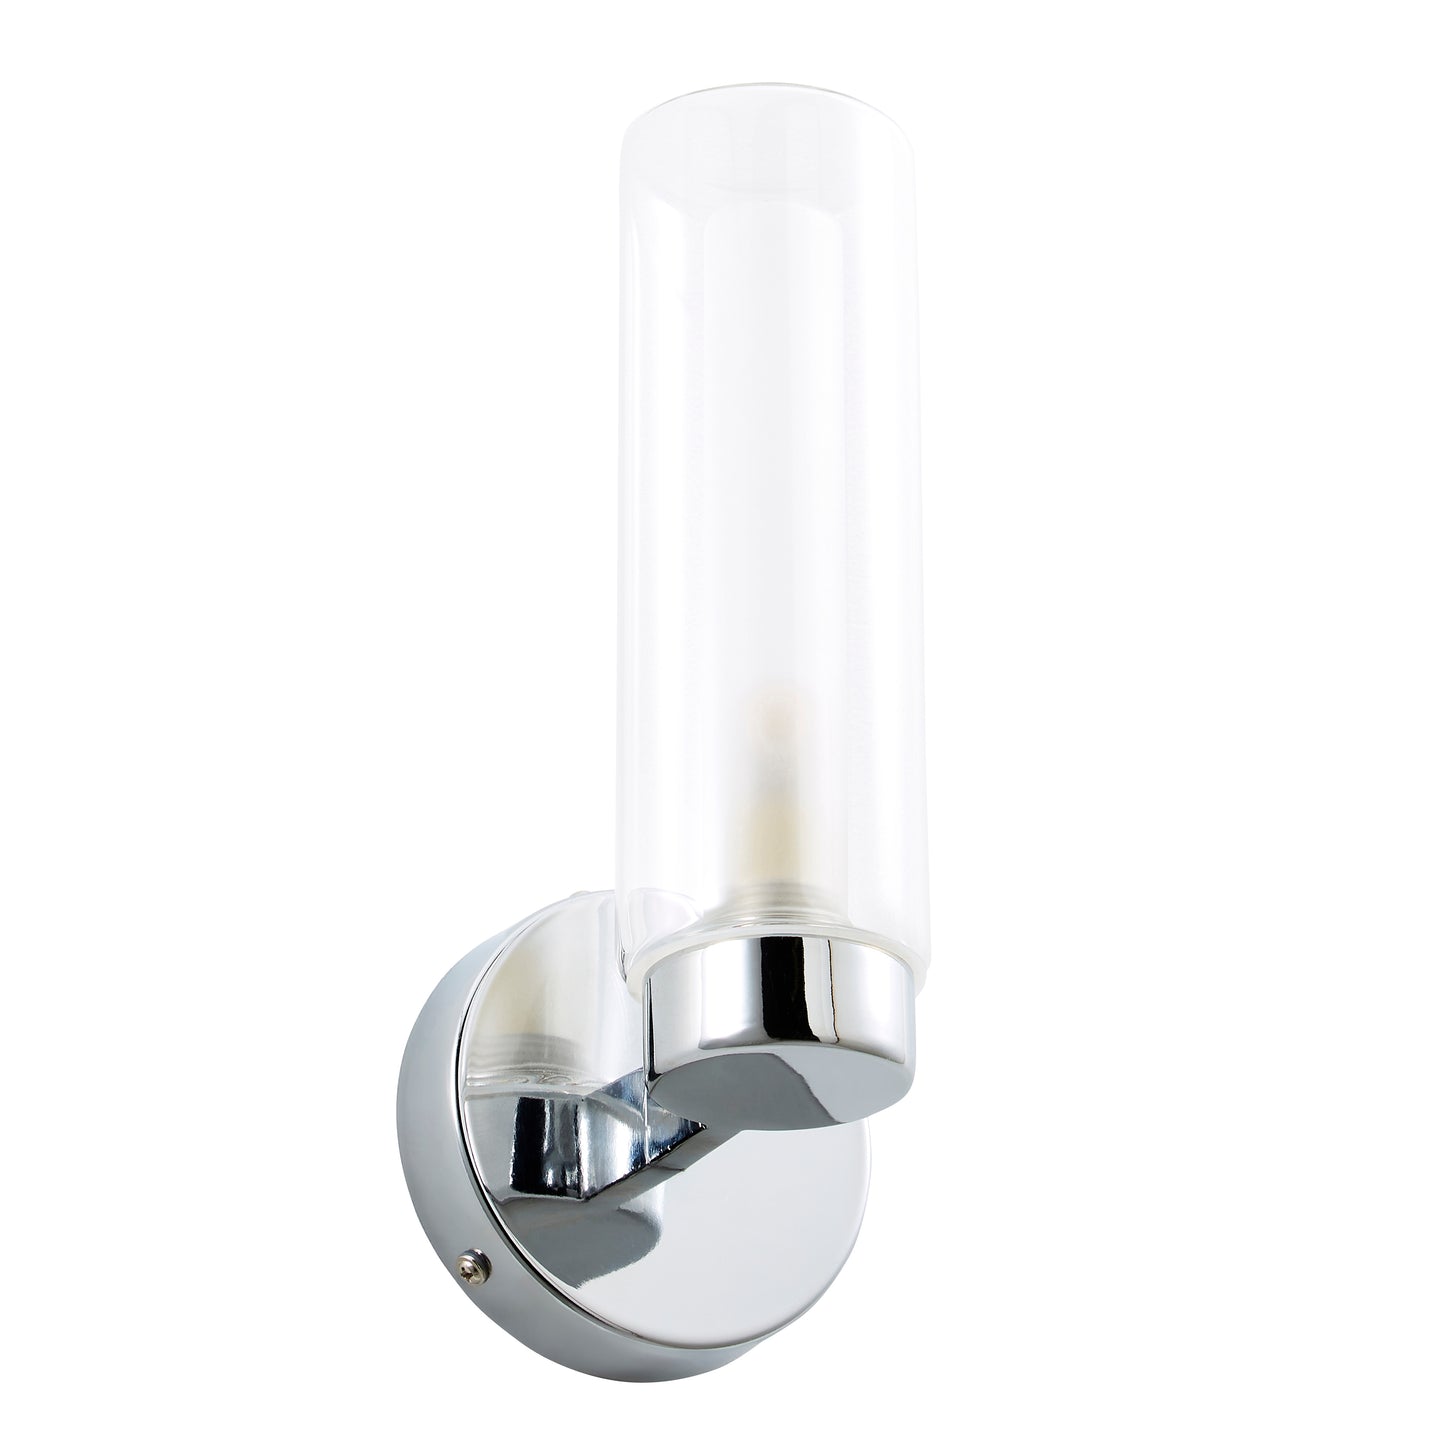 Our Nada chrome wall light with clear glass diffuser adds a touch of opulence and luxury to the walls of your home. The modern light fitting would look perfect installed next to a mirror, on corridors or hallways, bedside and living rooms, this light also has IP44 protection making it suitable for all bathrooms. 